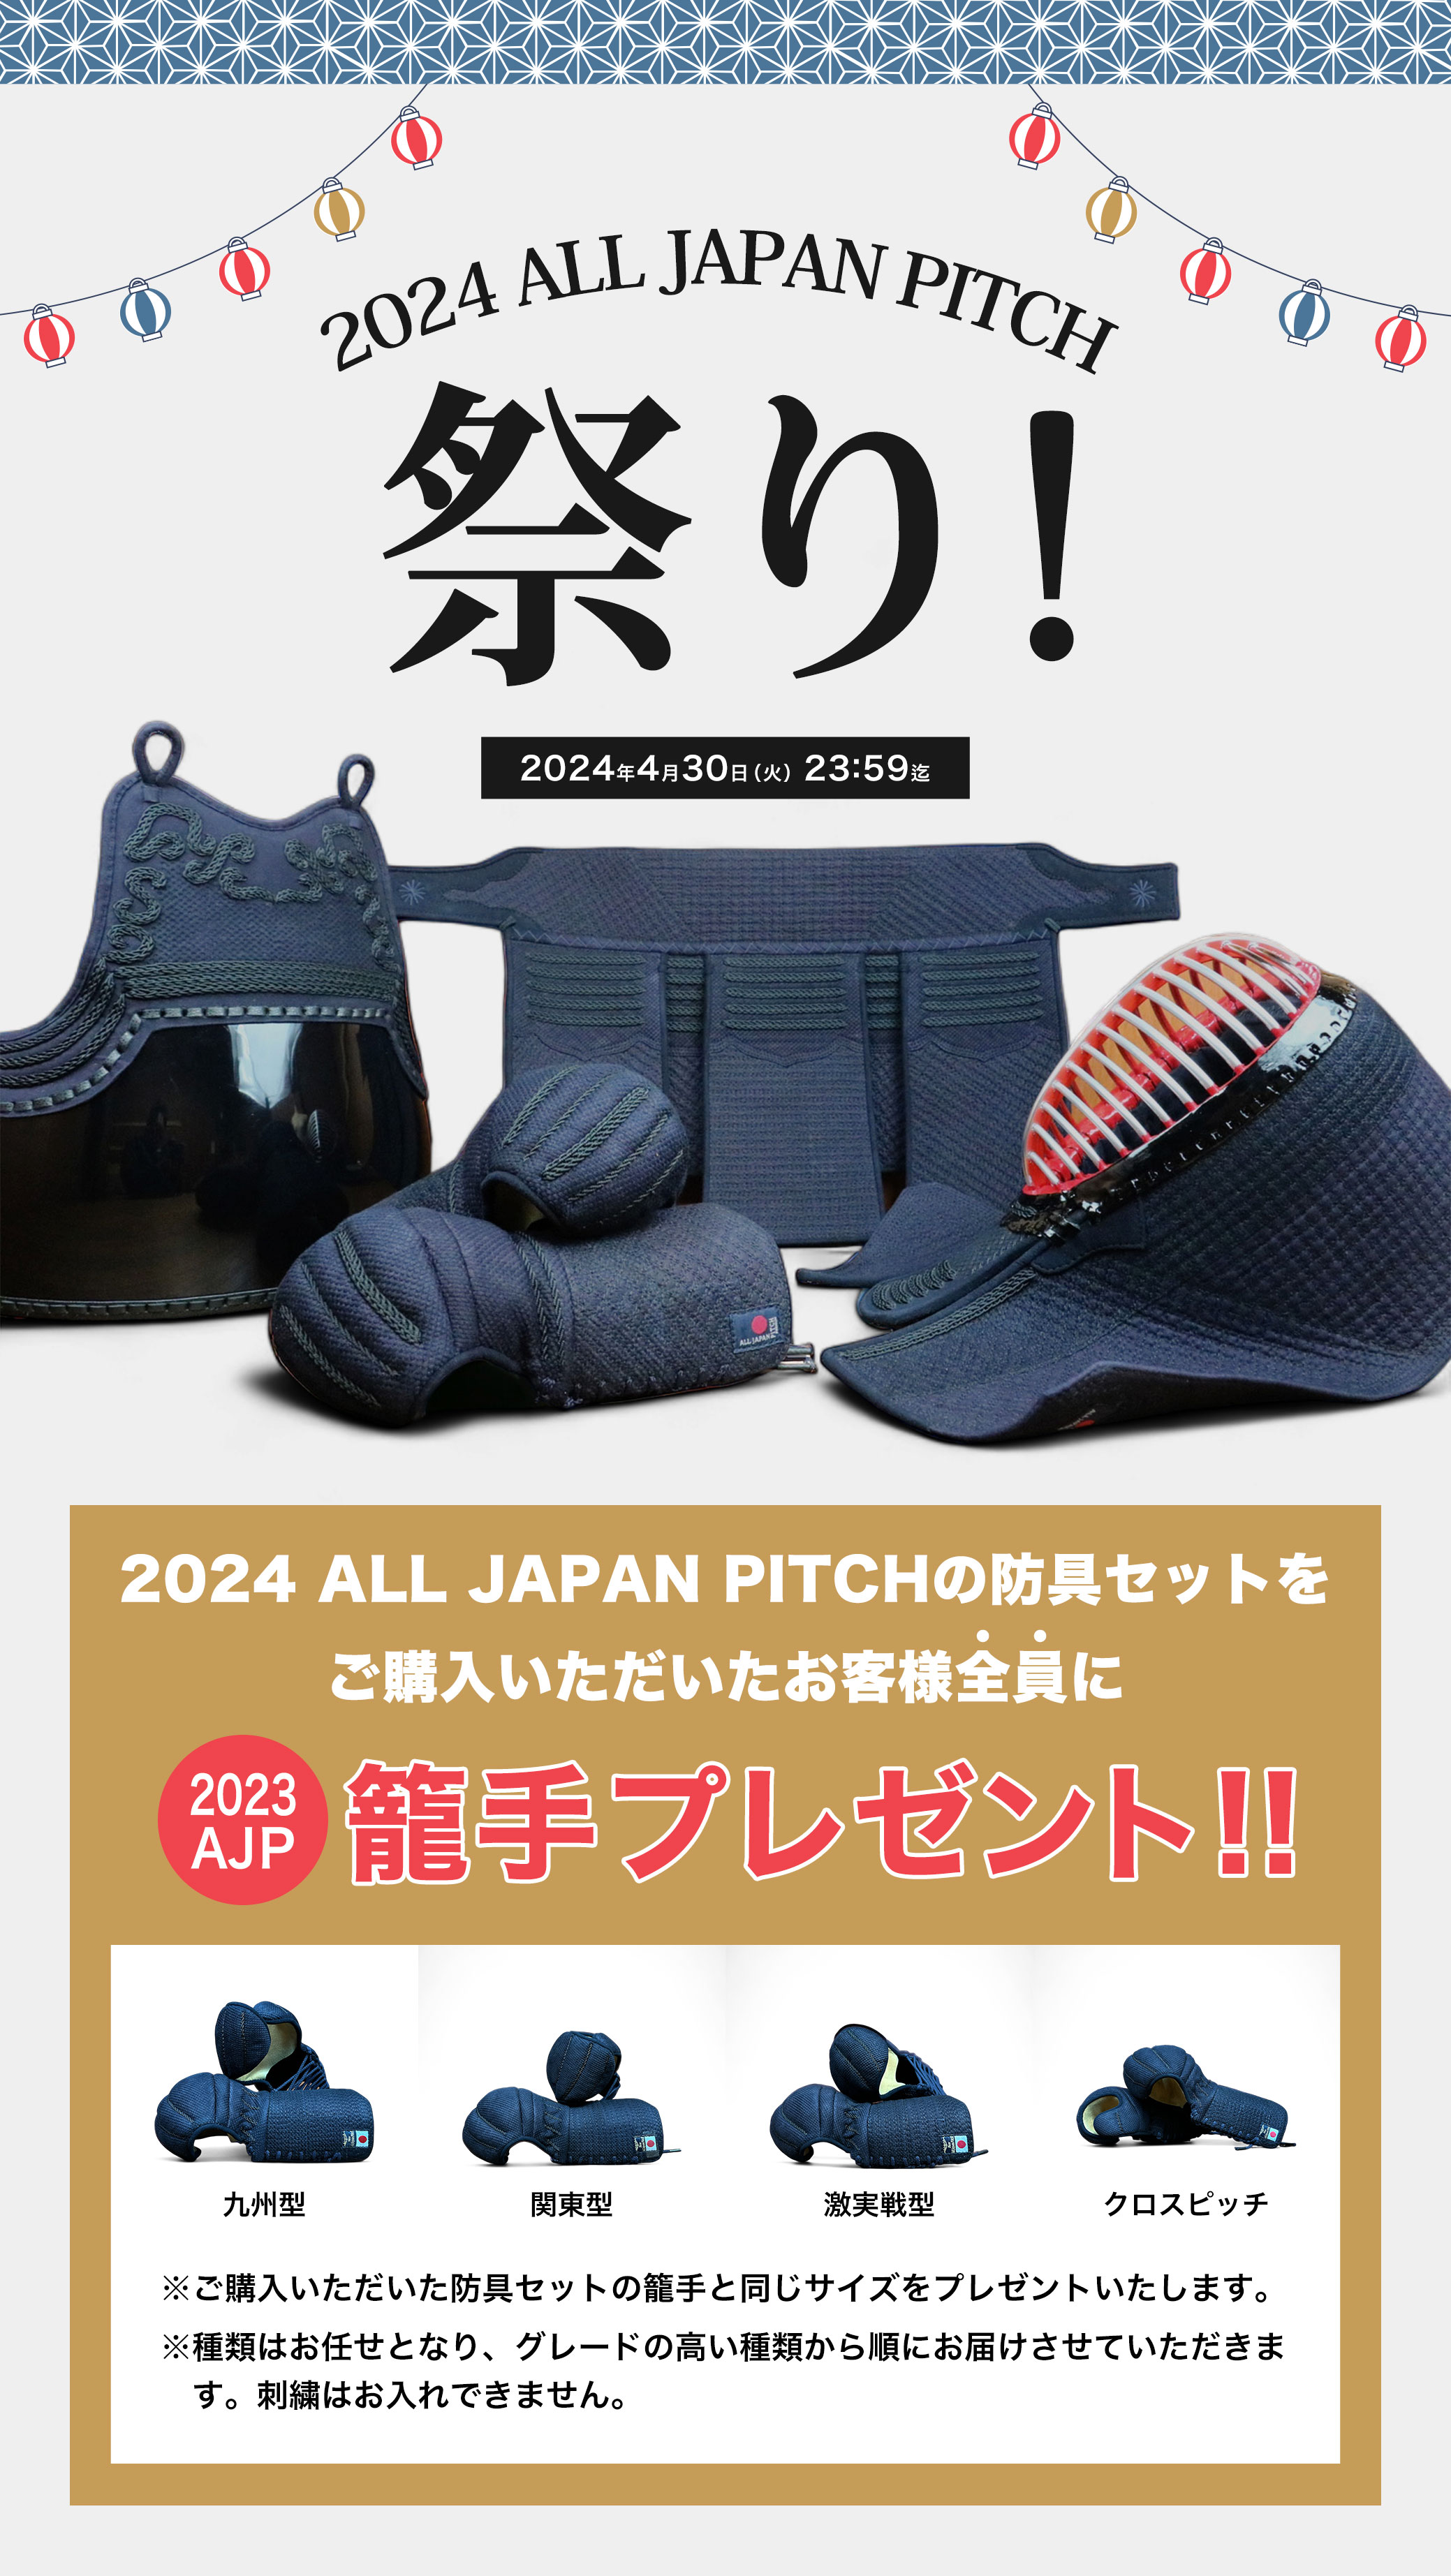 2024 ALL JAPAN PITCH 祭り！ 2024 ALL JAPAN PITCHの防具セットをご購入いただいたお客様全員に2023AJP籠手プレゼント！！